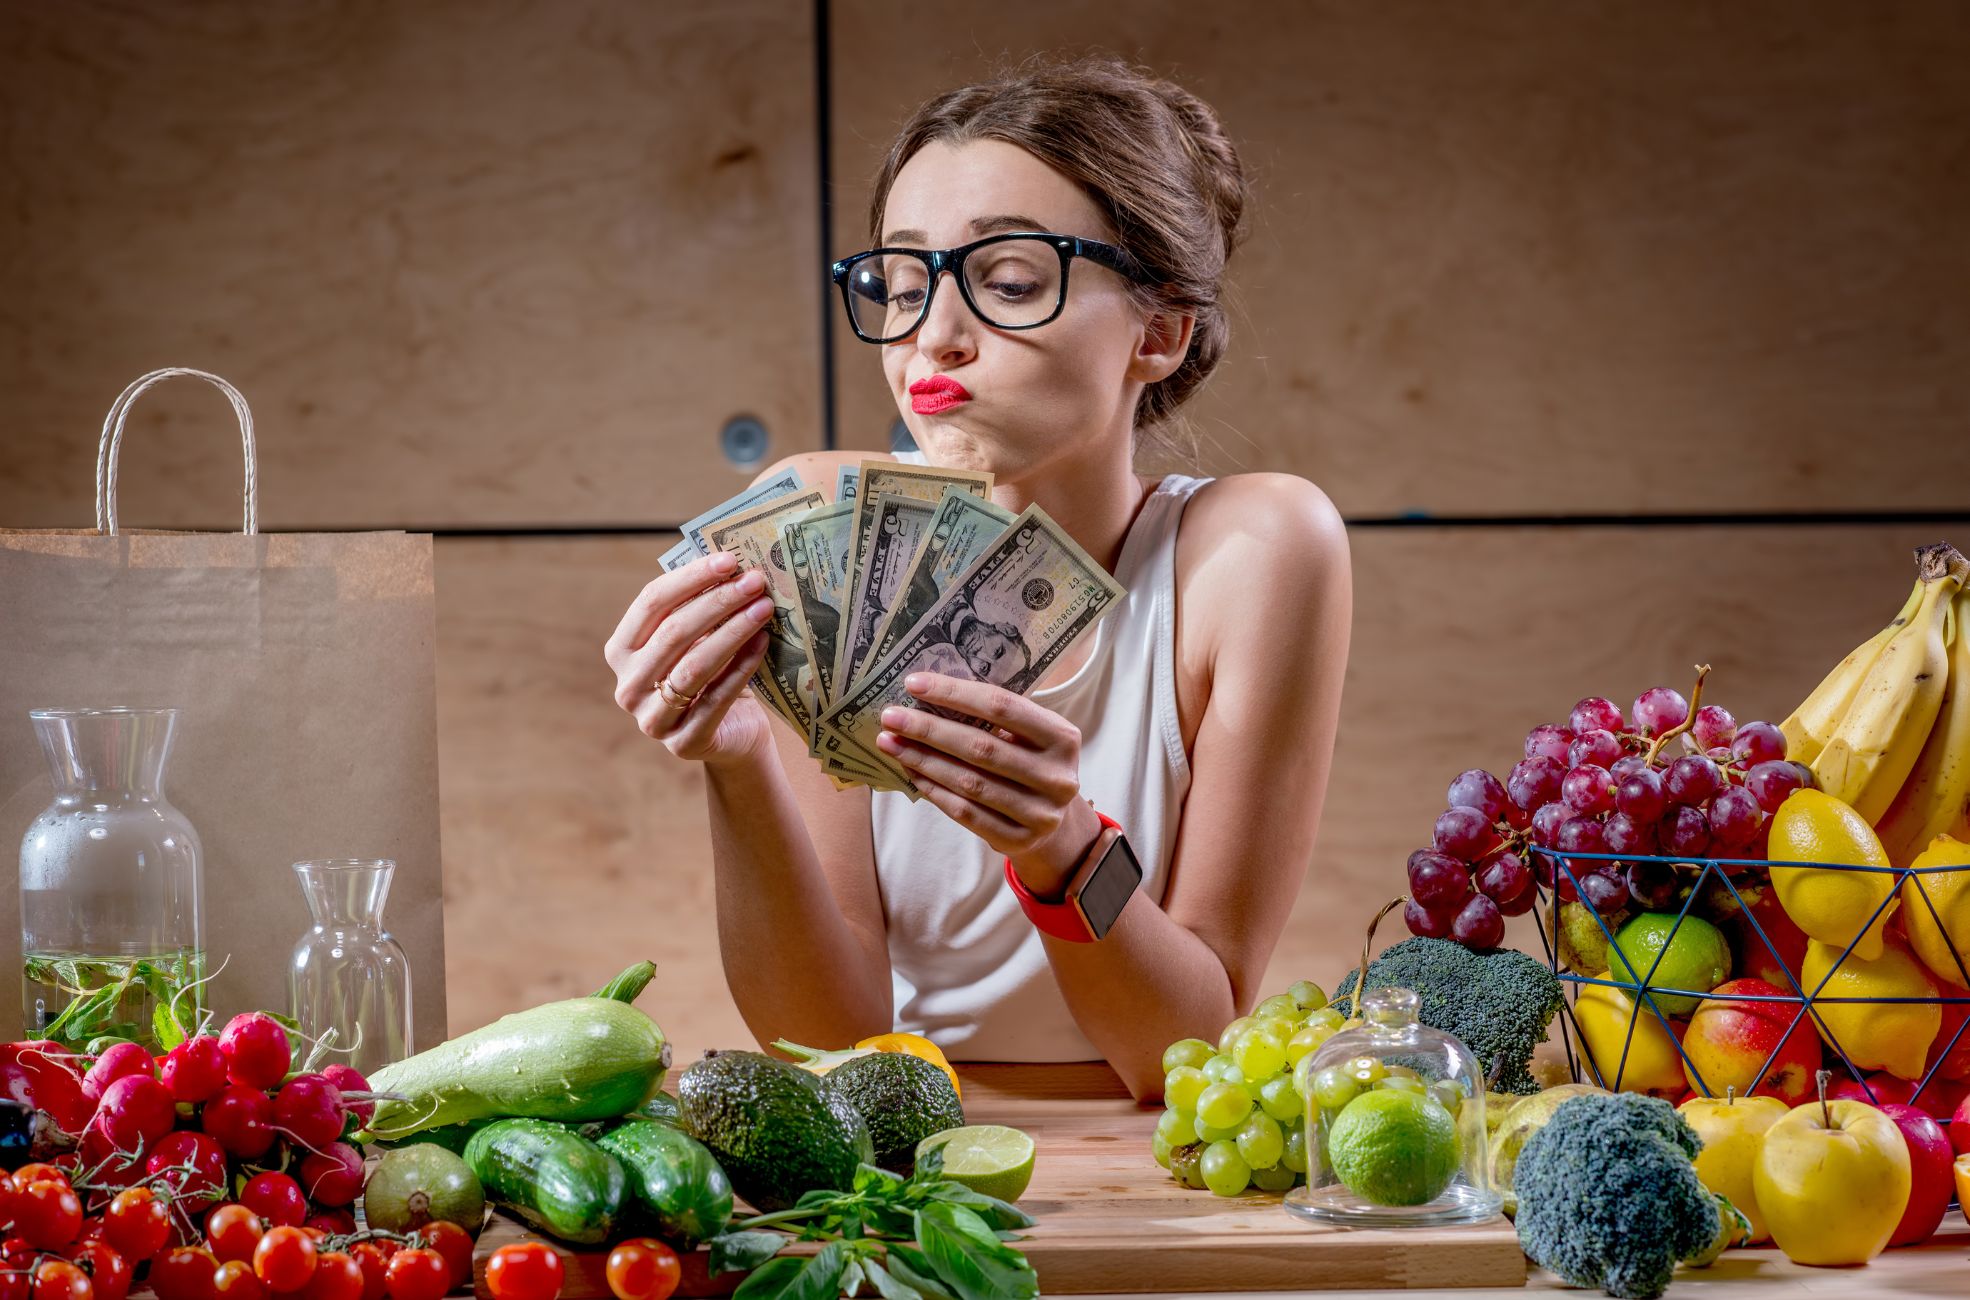 Woman Counting Money Next To Food